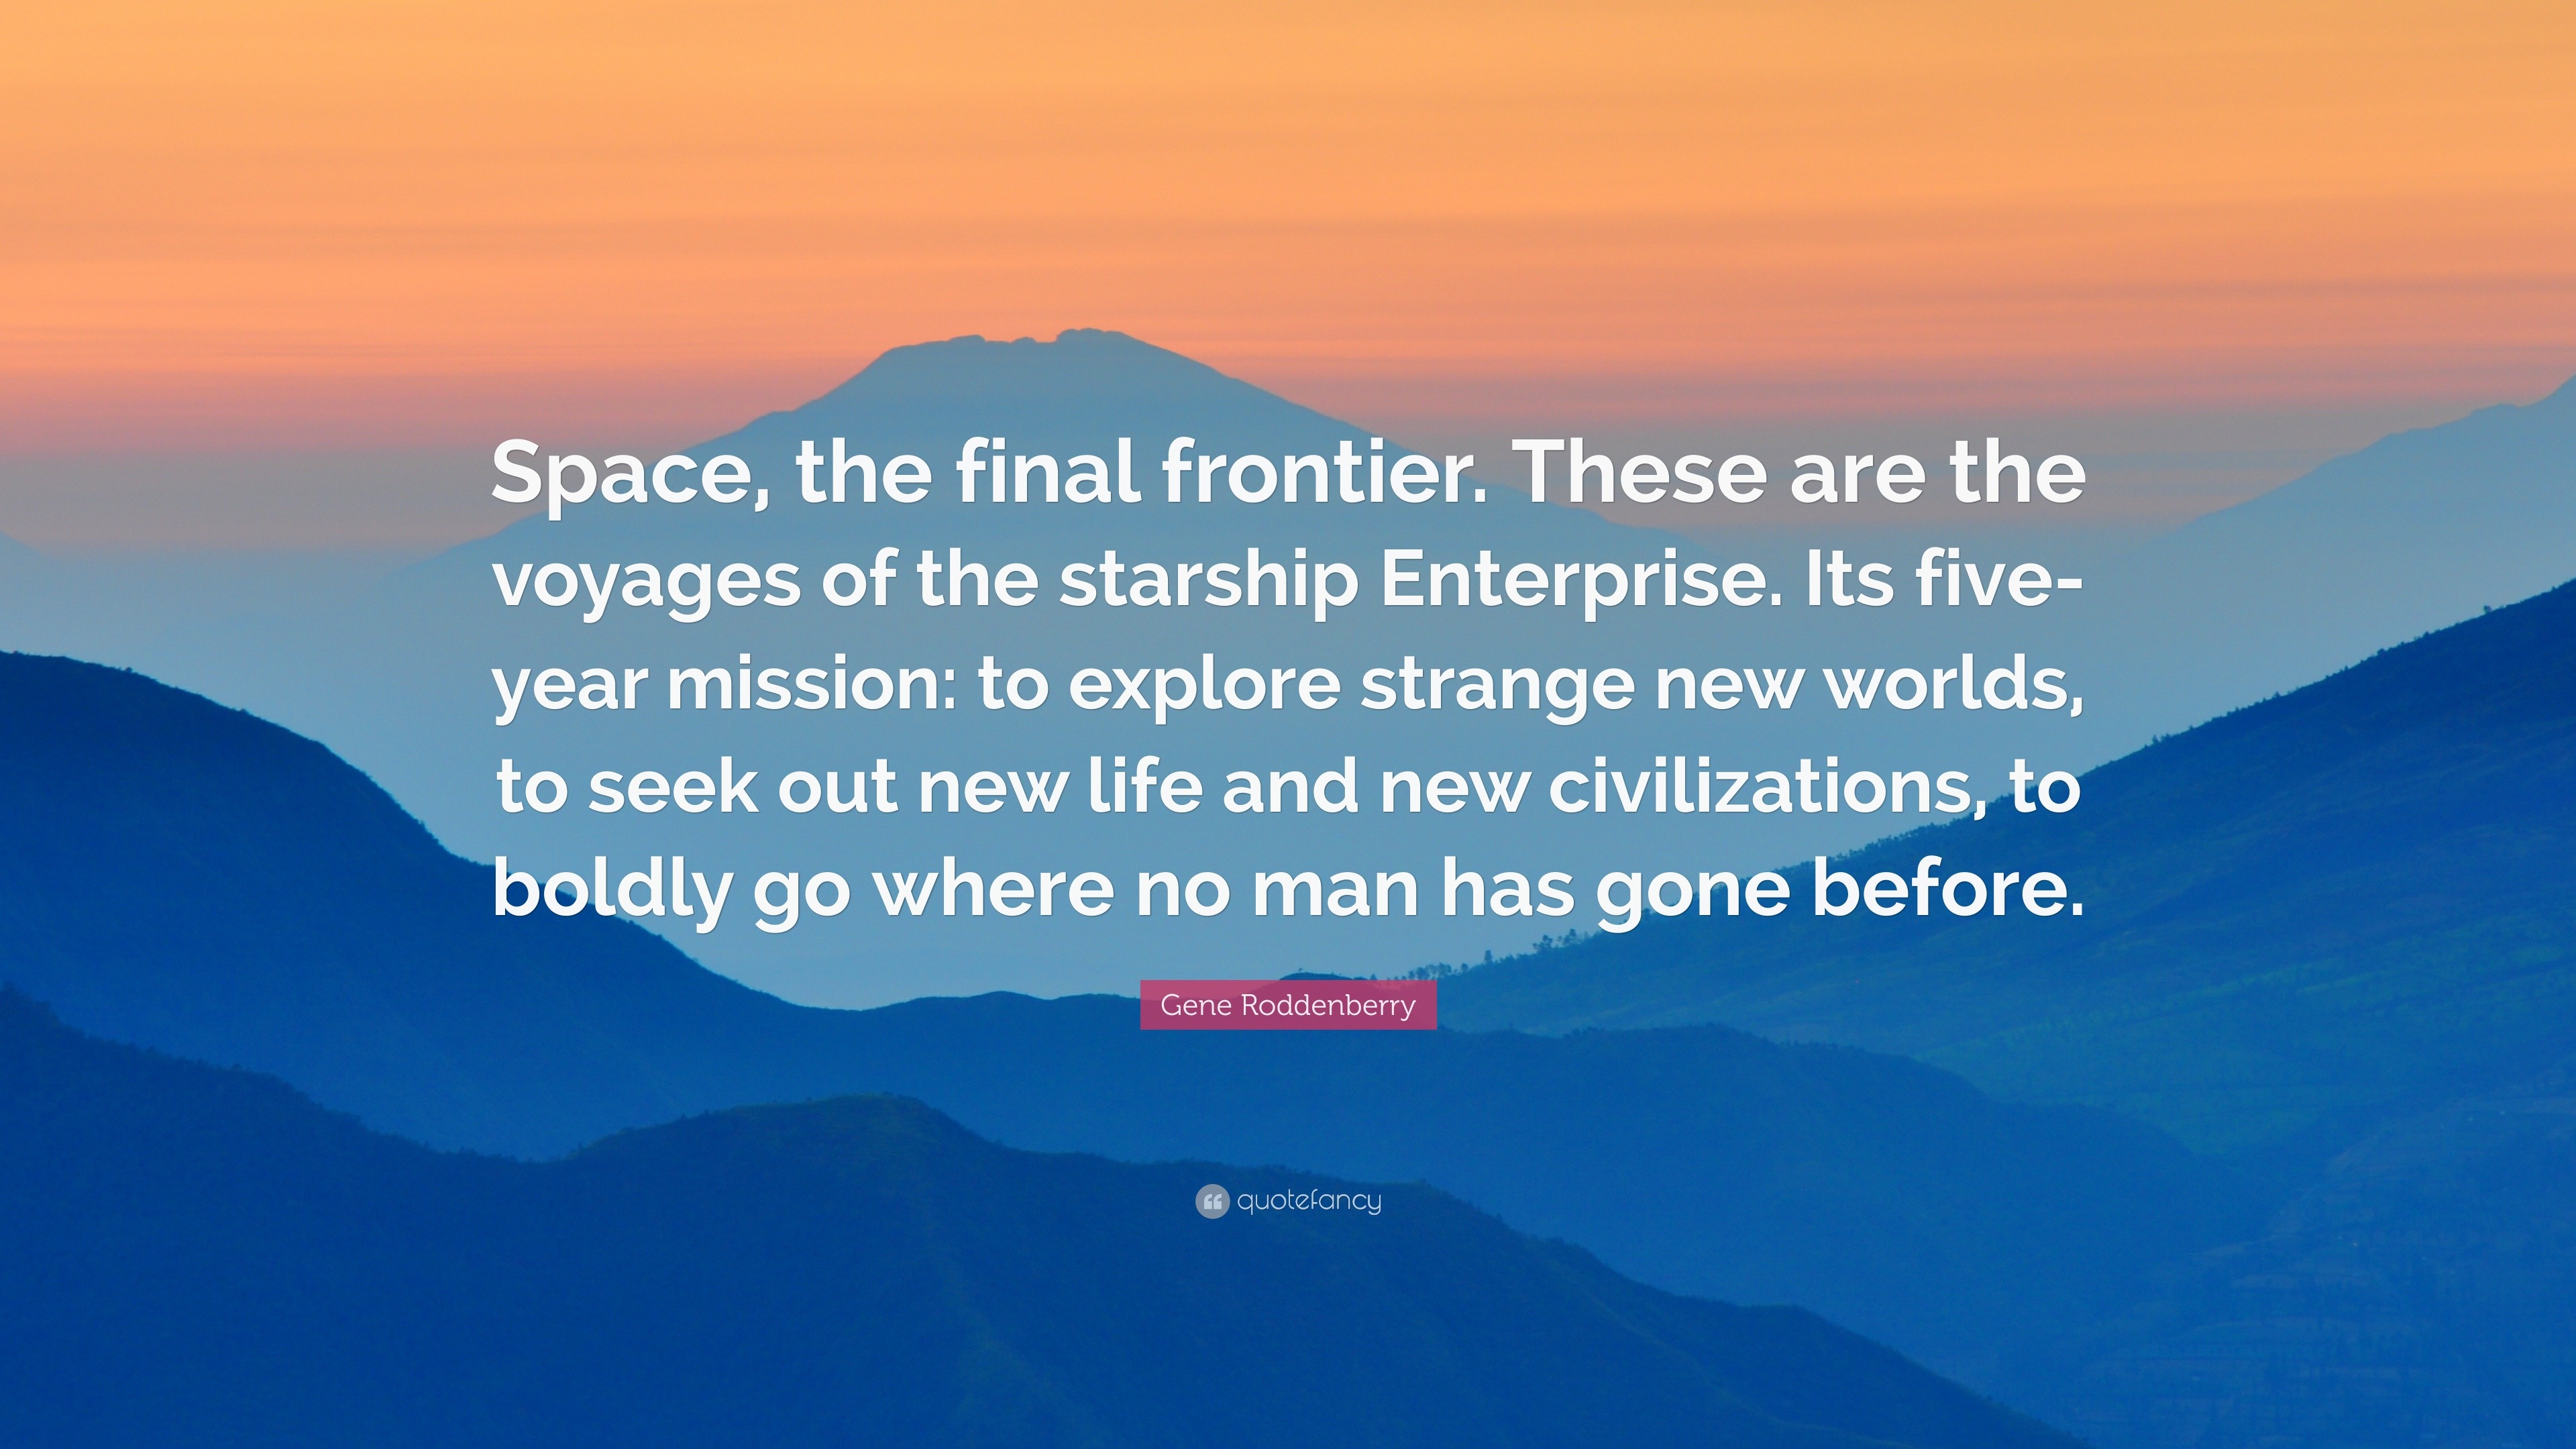 Gene Roddenberry Quote: “Space, The Final Frontier. These Are The Voyages Of The Starship Enterprise. Its Five-Year Mission: To Explore Strange N...”